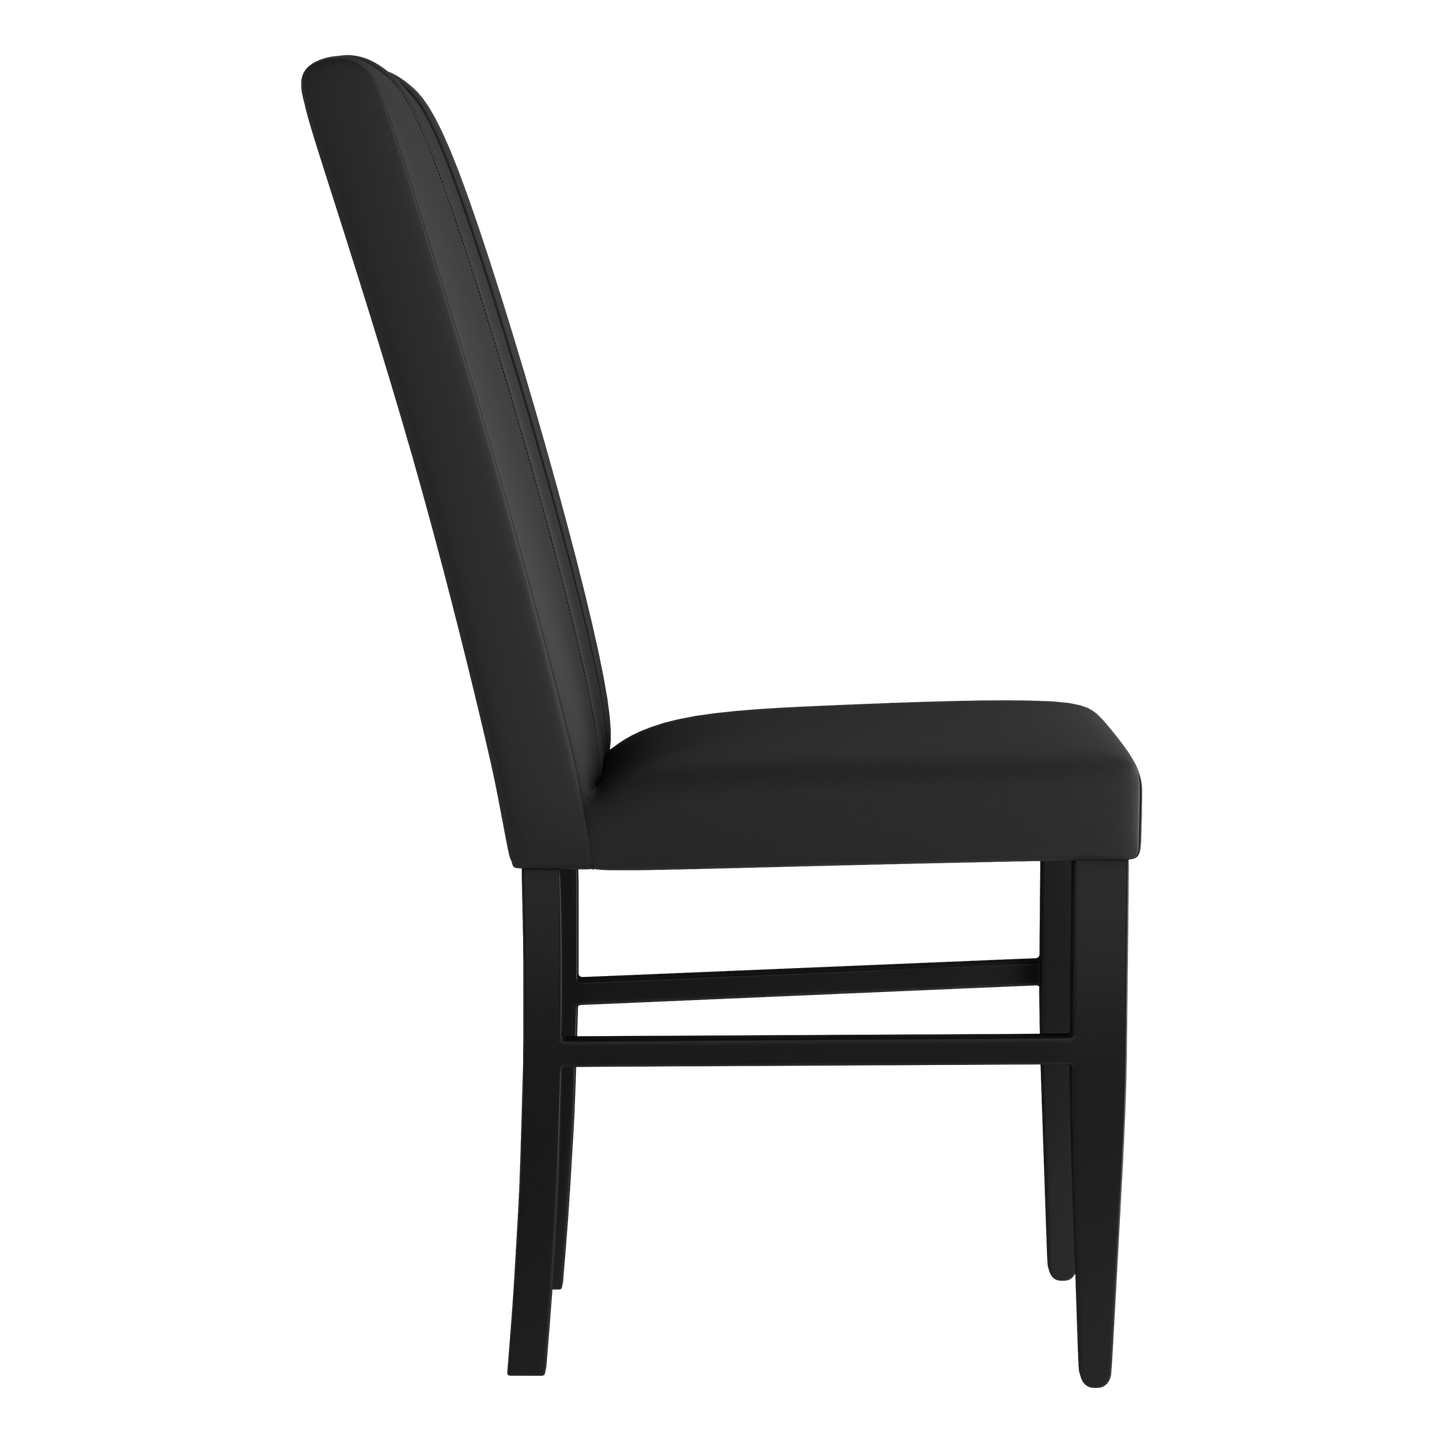 Side Chair 2000 with Shoulda Been Stars Icon Logo Set of 2